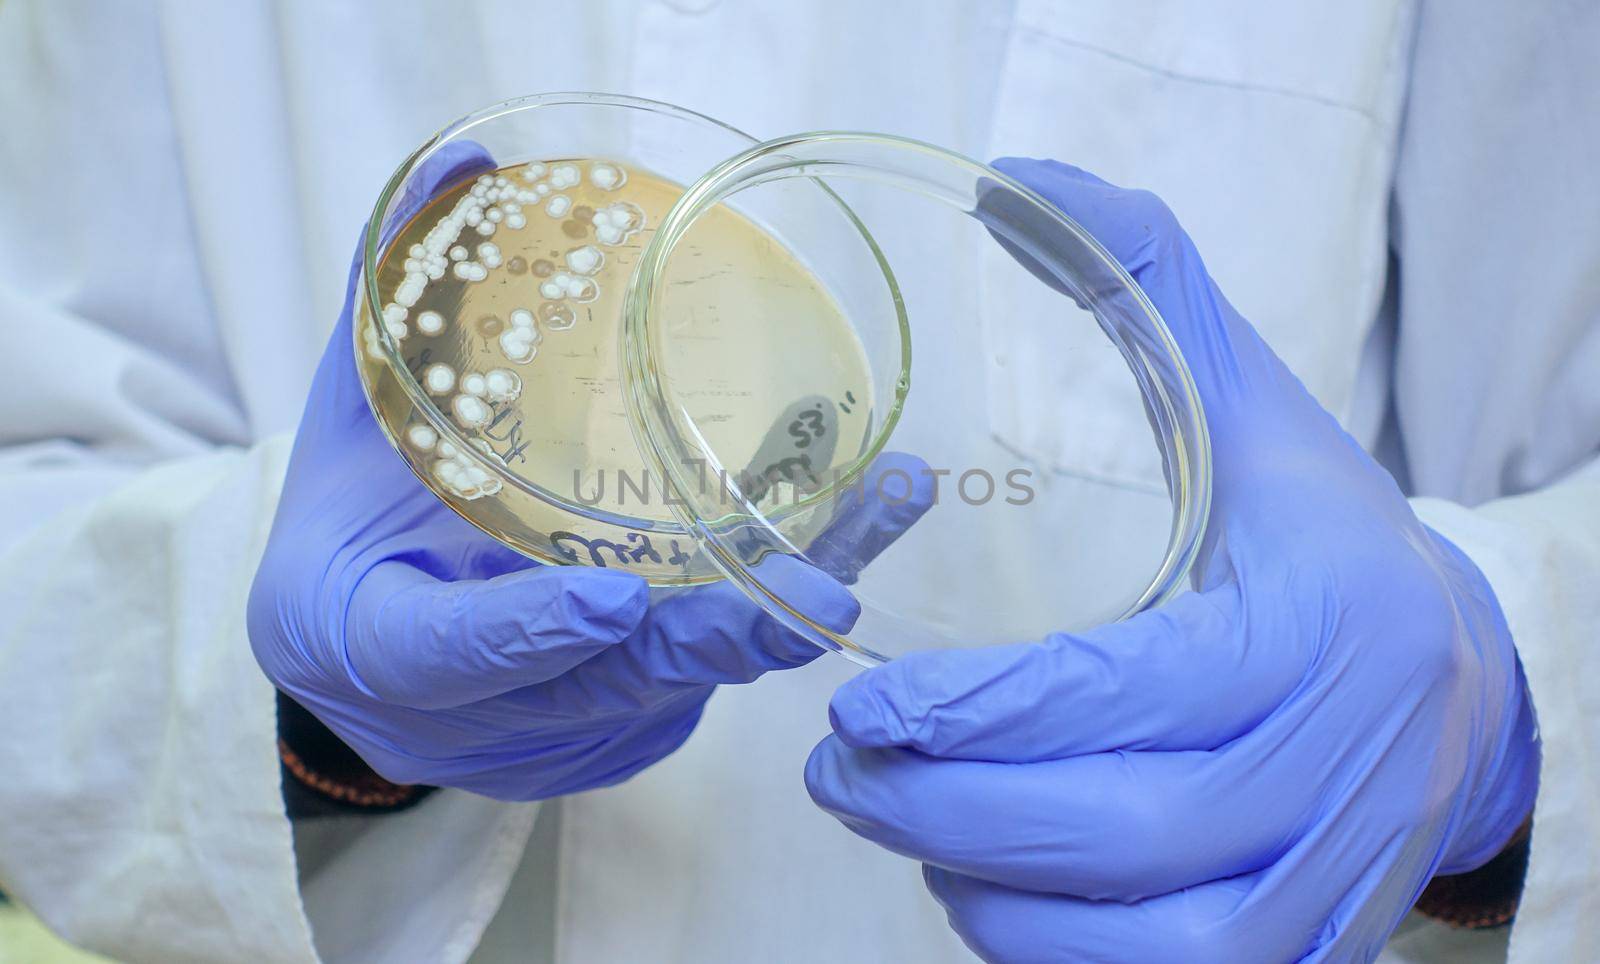 A scientist shows bacteria in a Petri dish to the camera. by Jannetta